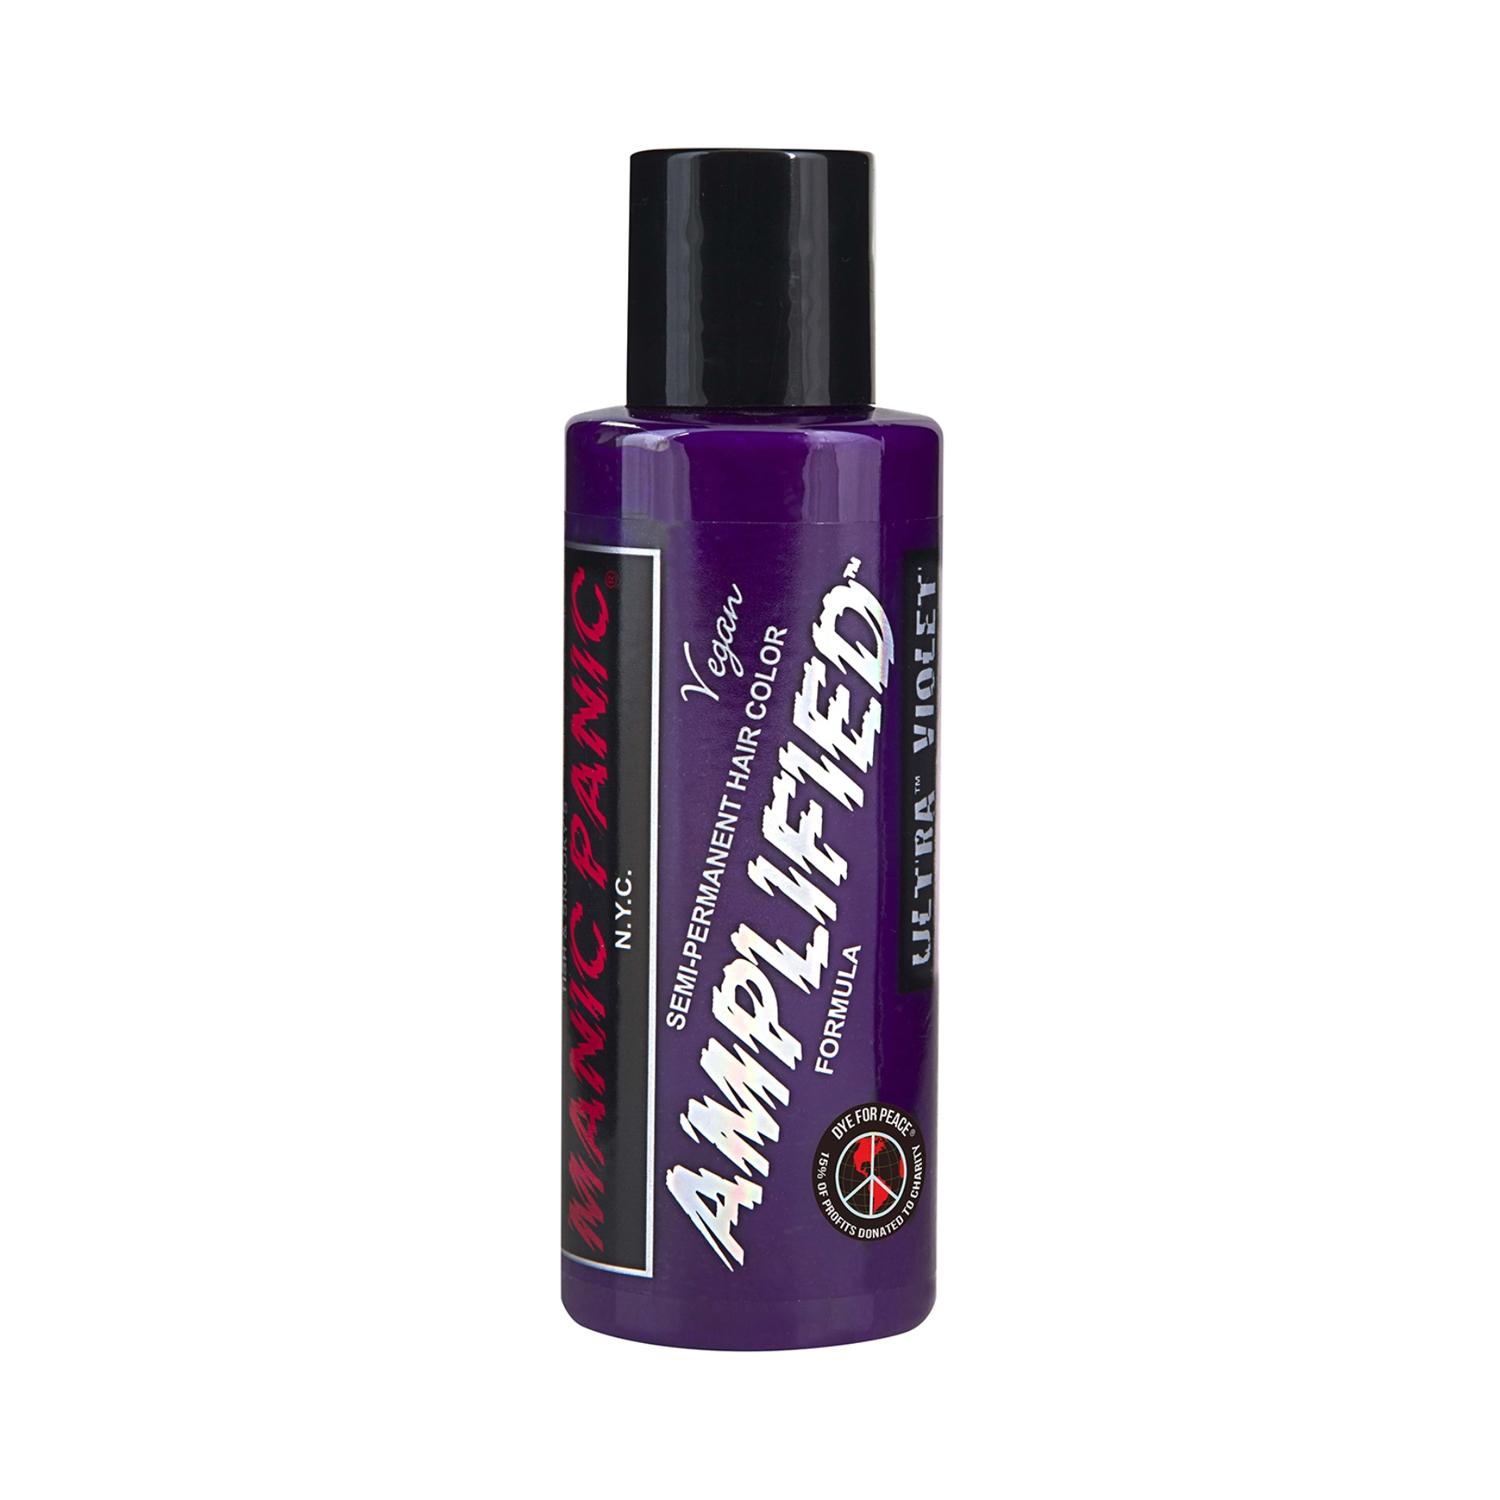 manic panic amplified semi permanent hair color - ultra violet (118ml)